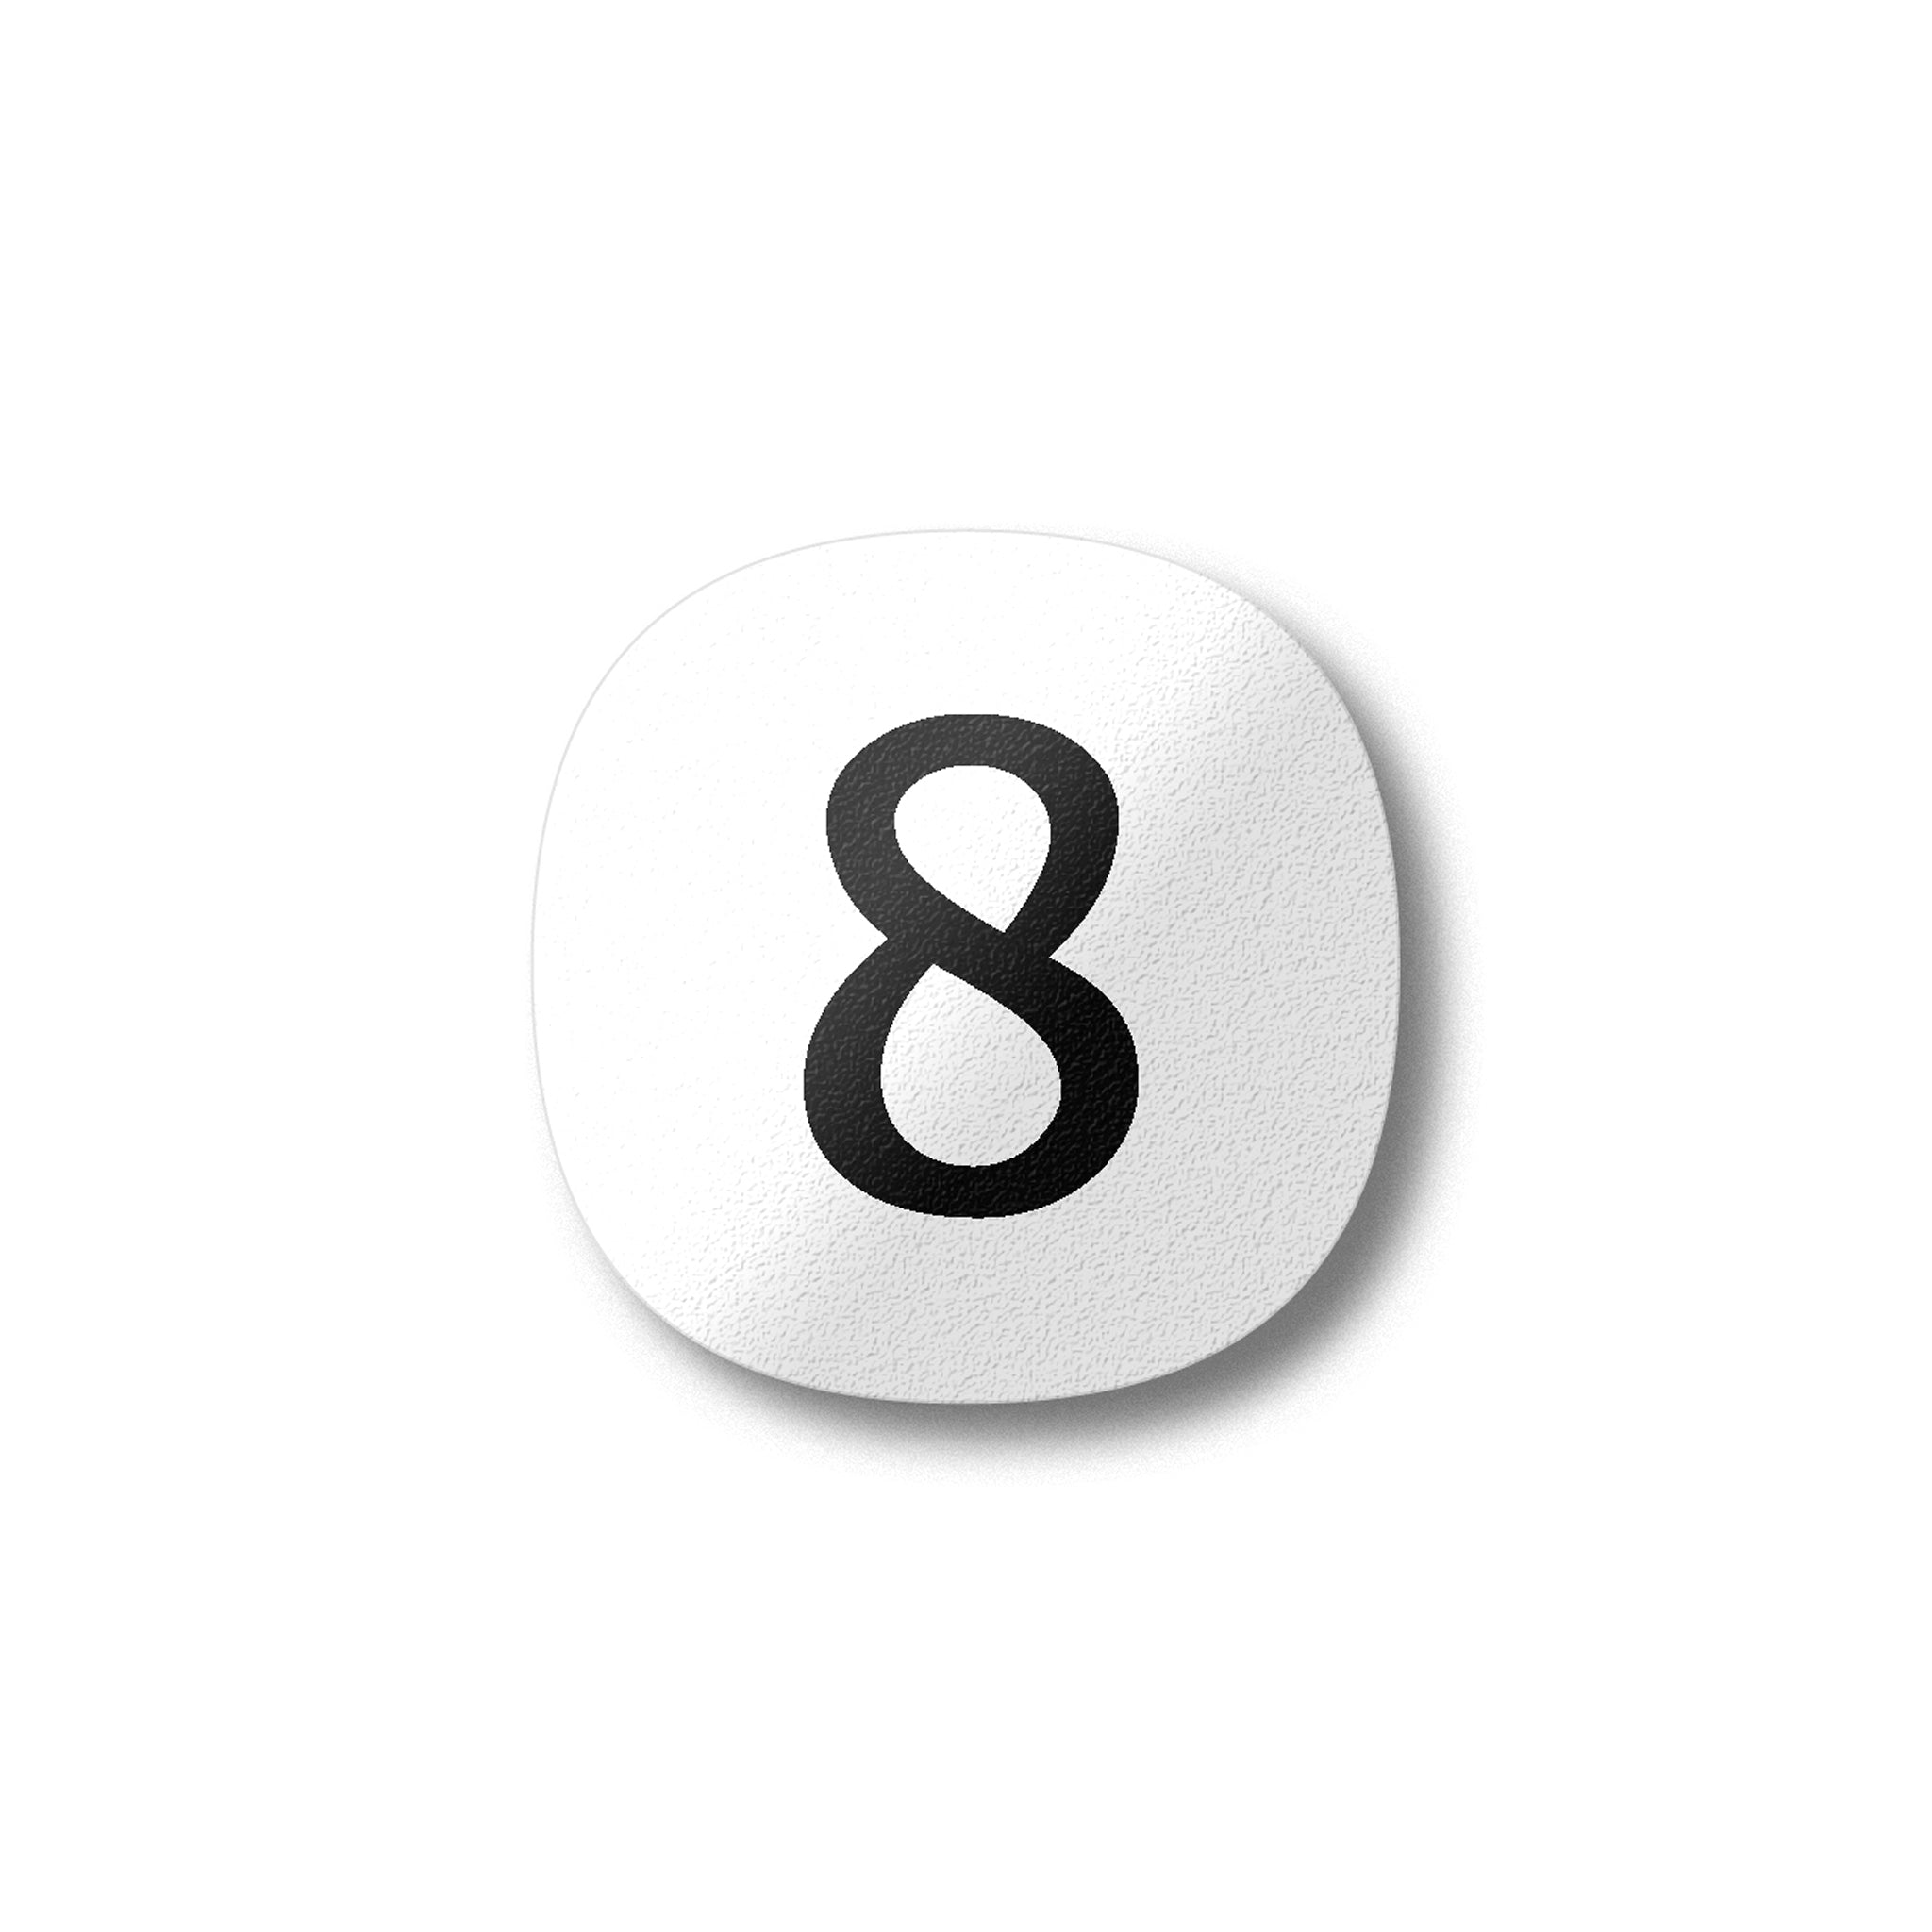 A black number eight on a white background design plywood fridge magnet by Beyond the Fridge